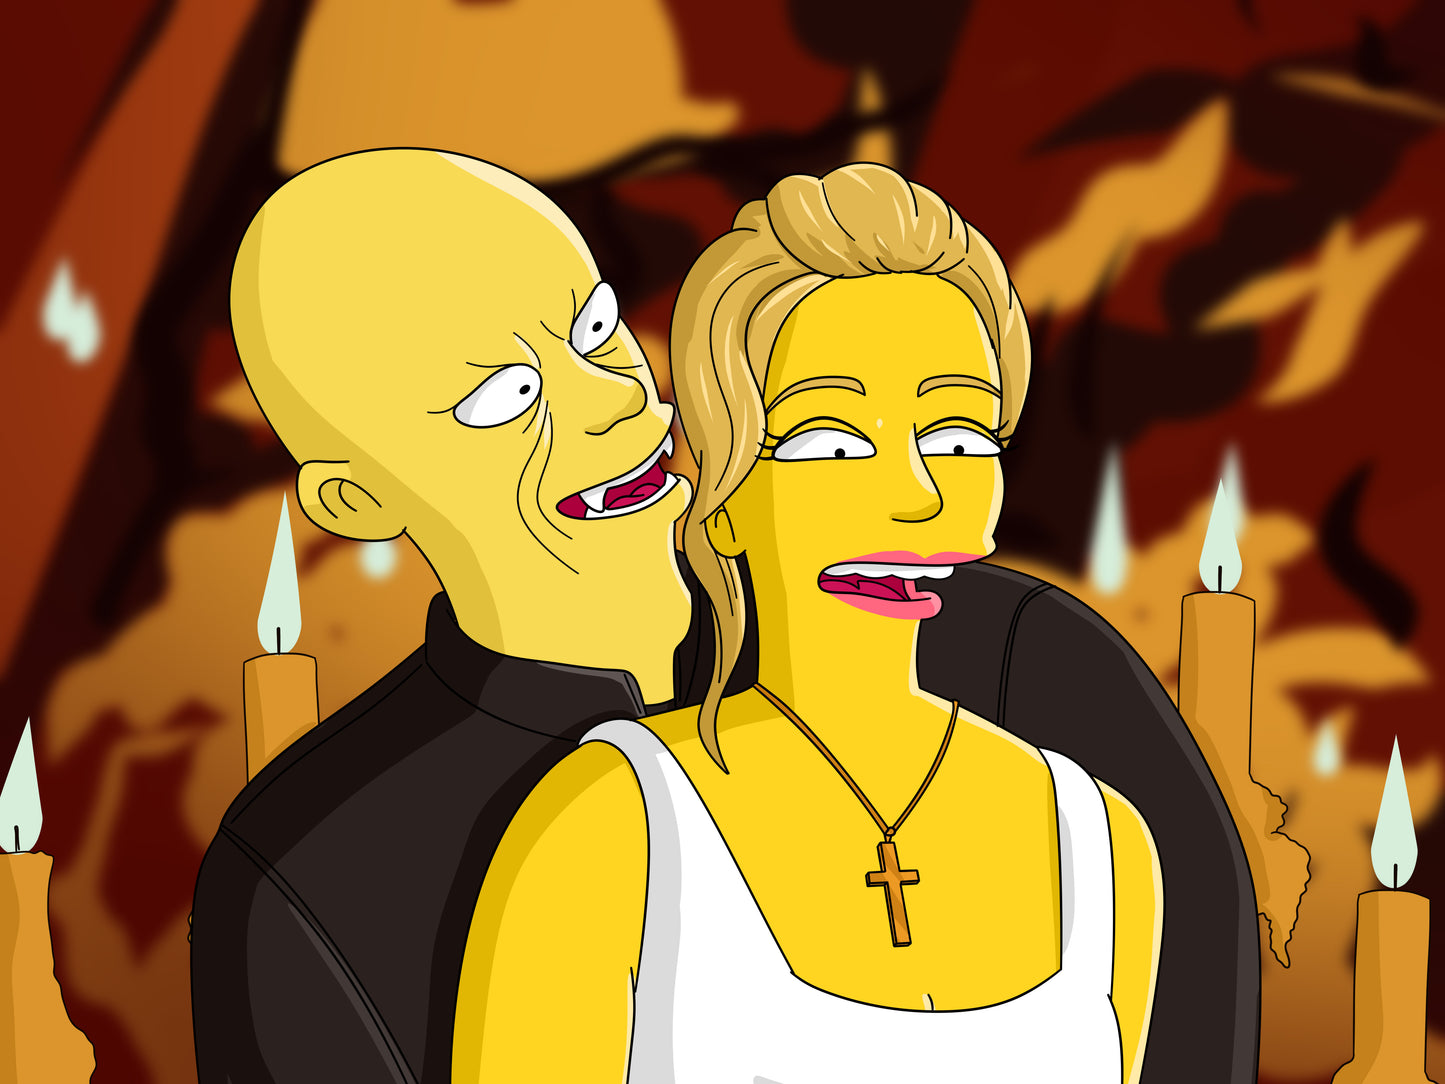 Buffy and The Master in Springfield